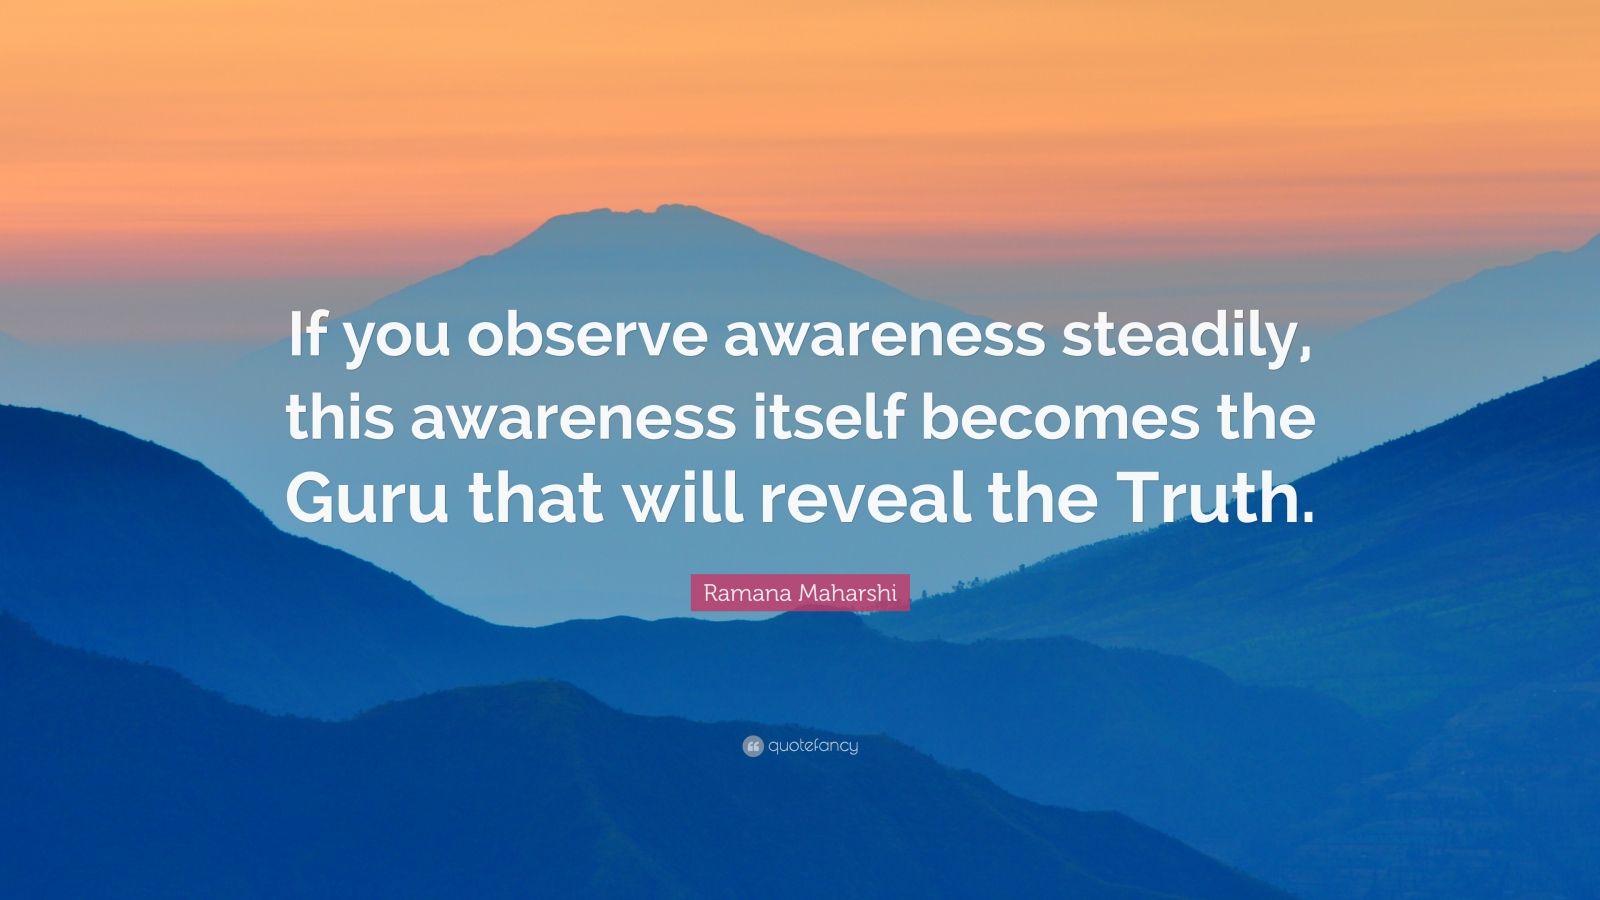 5040941 Ramana Maharshi Quote If you observe awareness steadily this